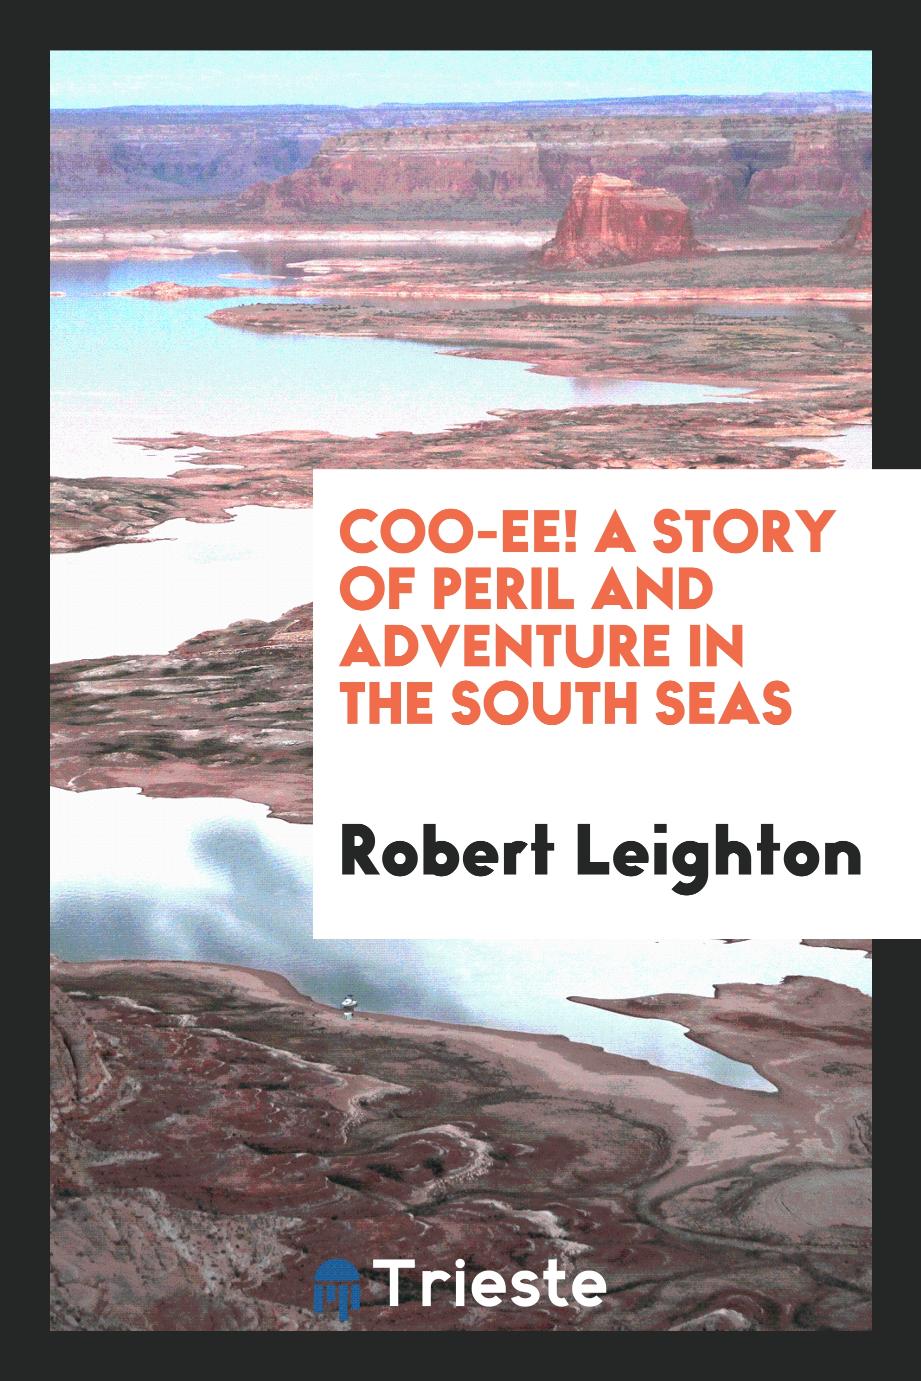 Coo-ee! A story of peril and adventure in the south seas